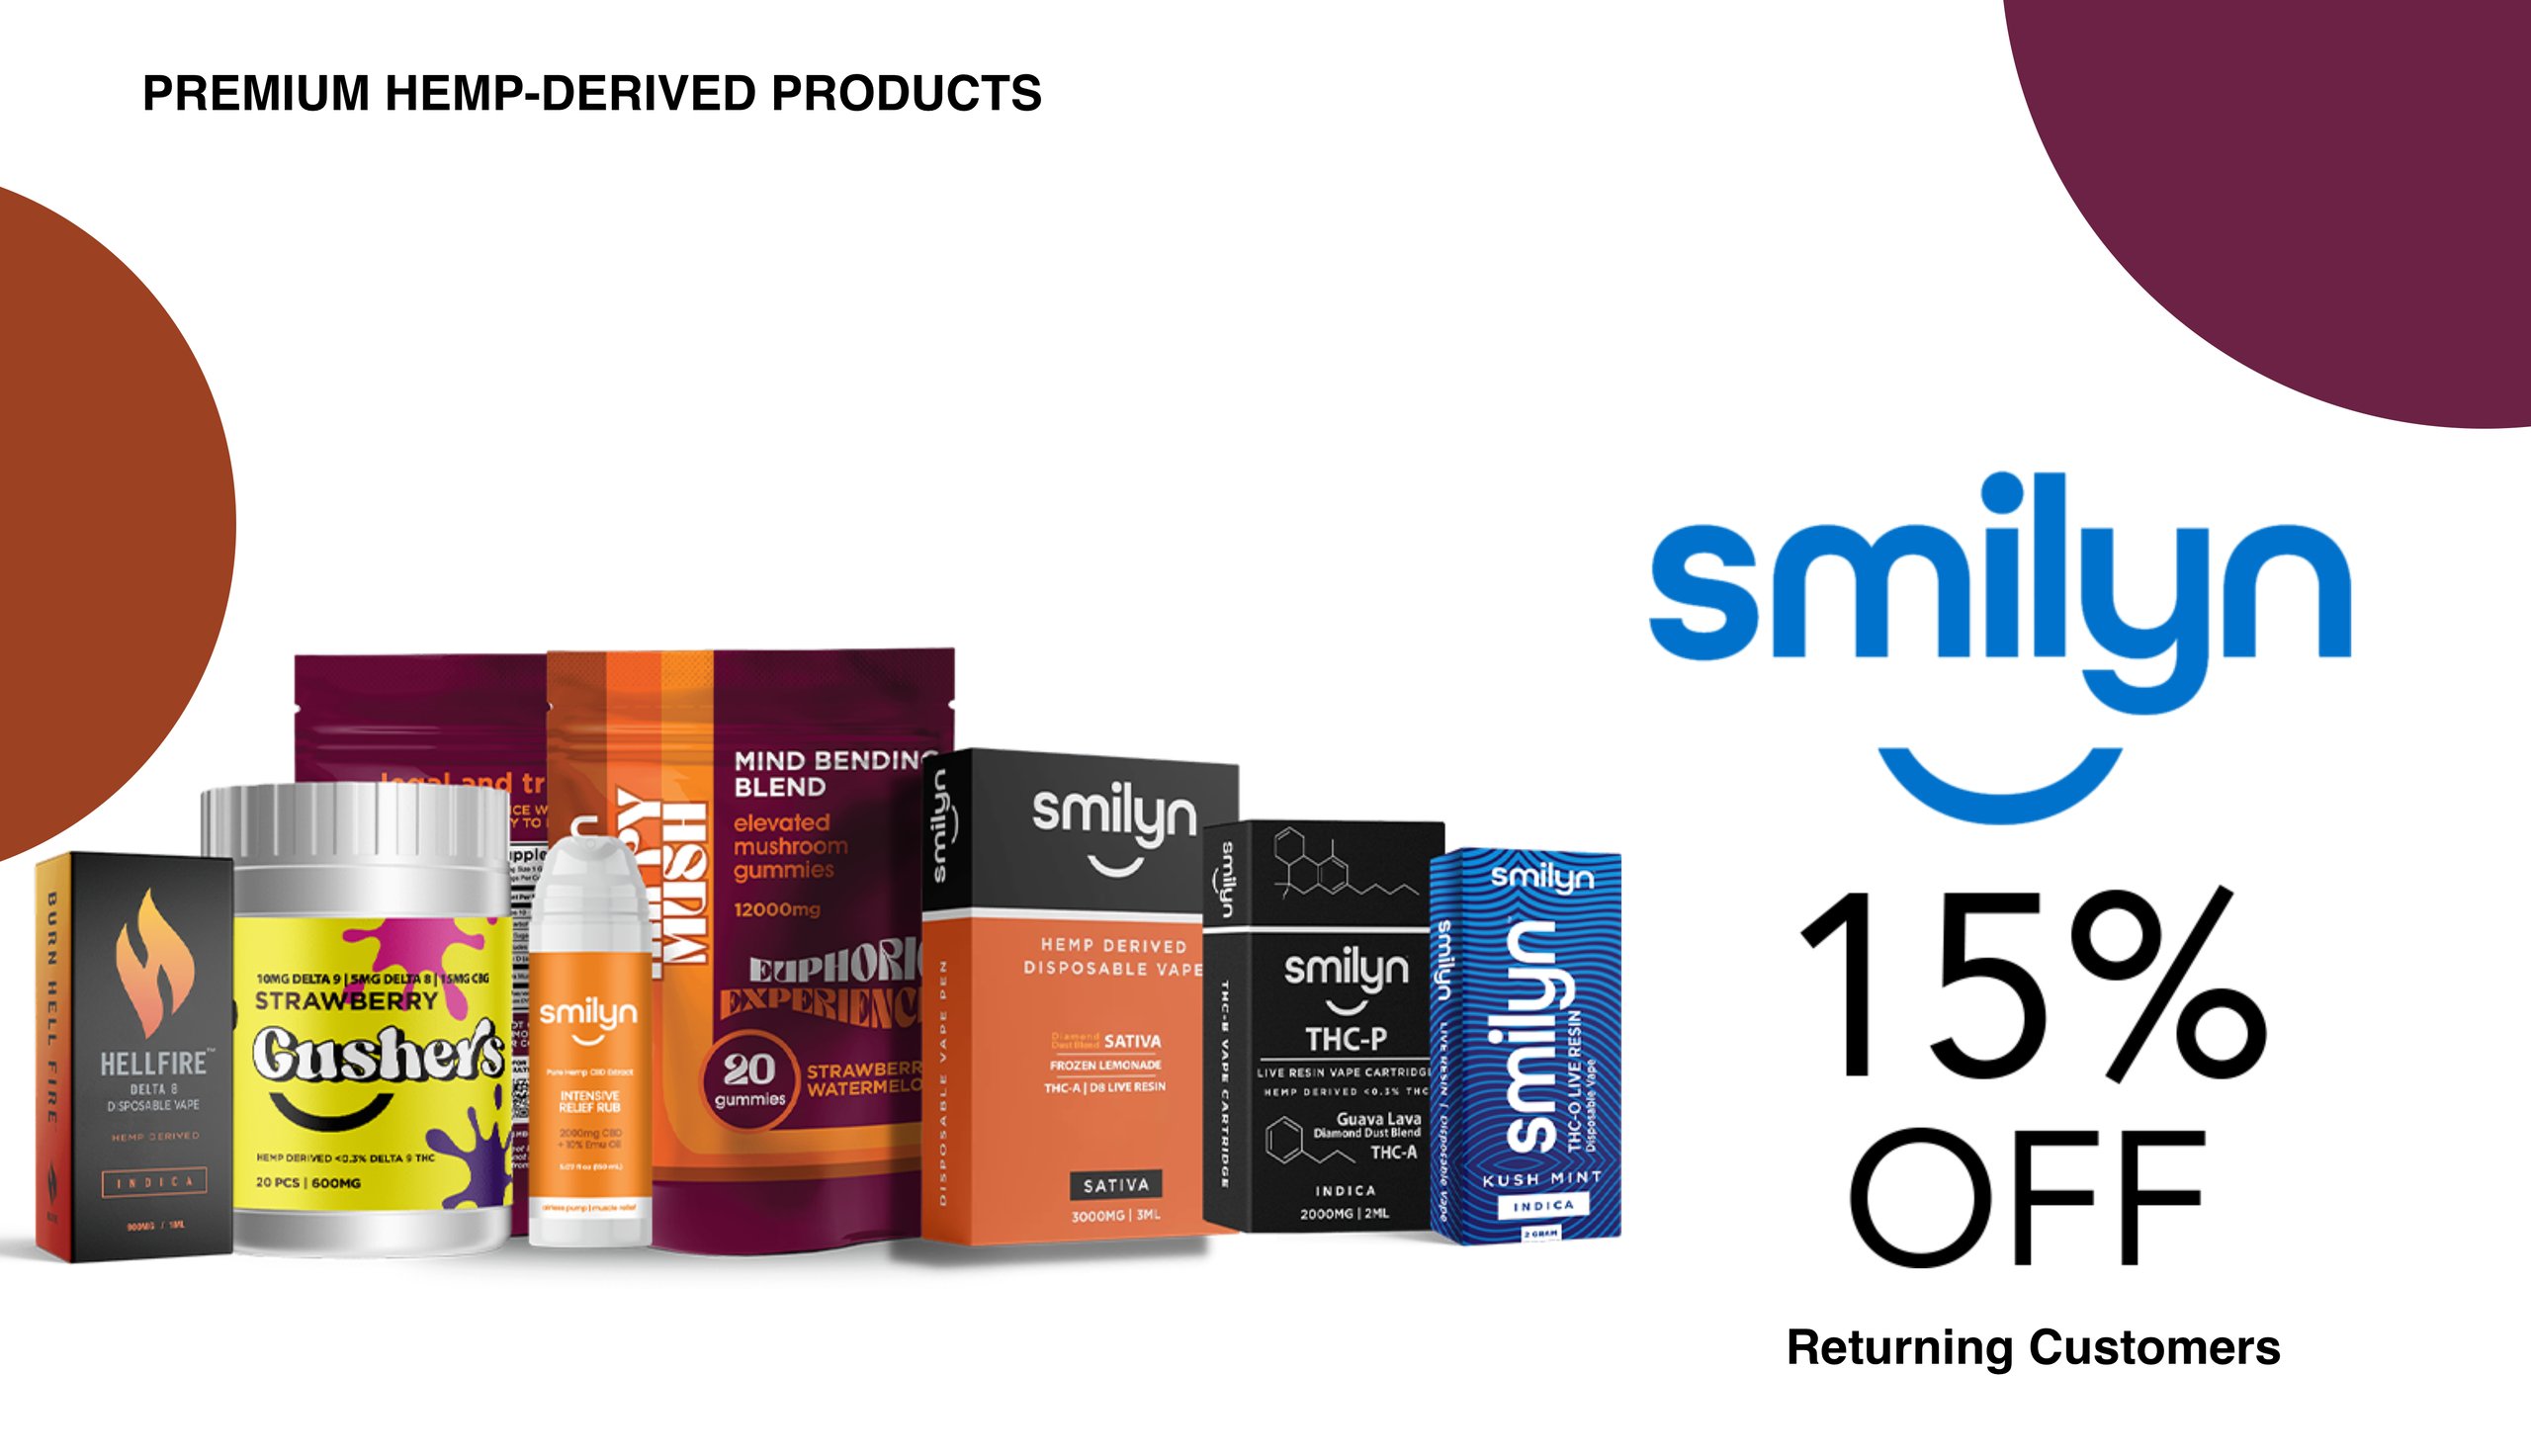 15% OFF Smilyn Wellness Discount Code for Returning Customers - Save On Cannabis